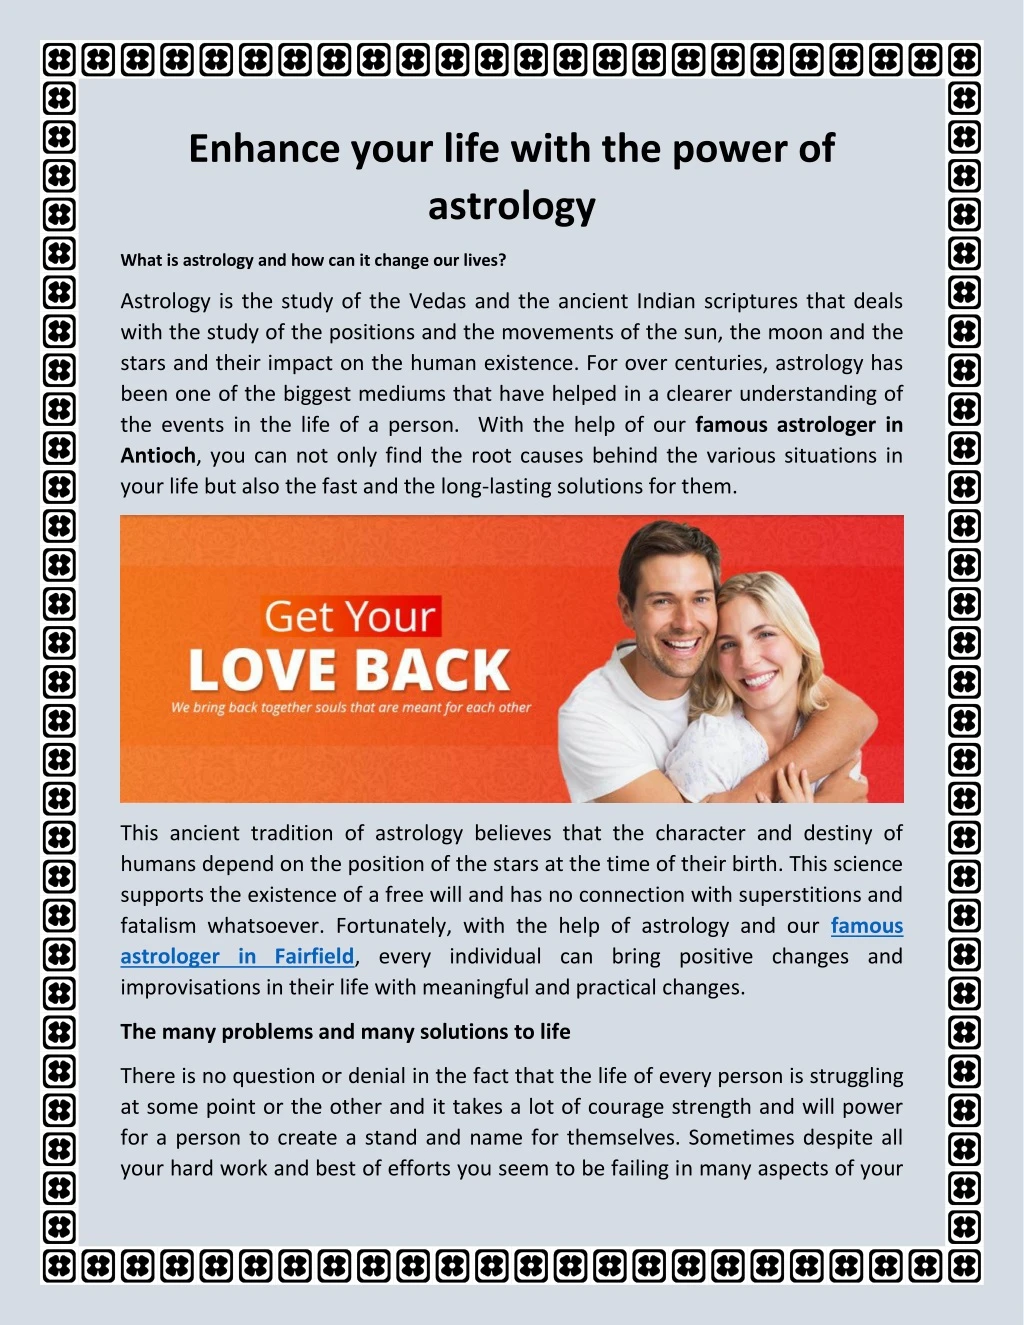 enhance your life with the power of astrology